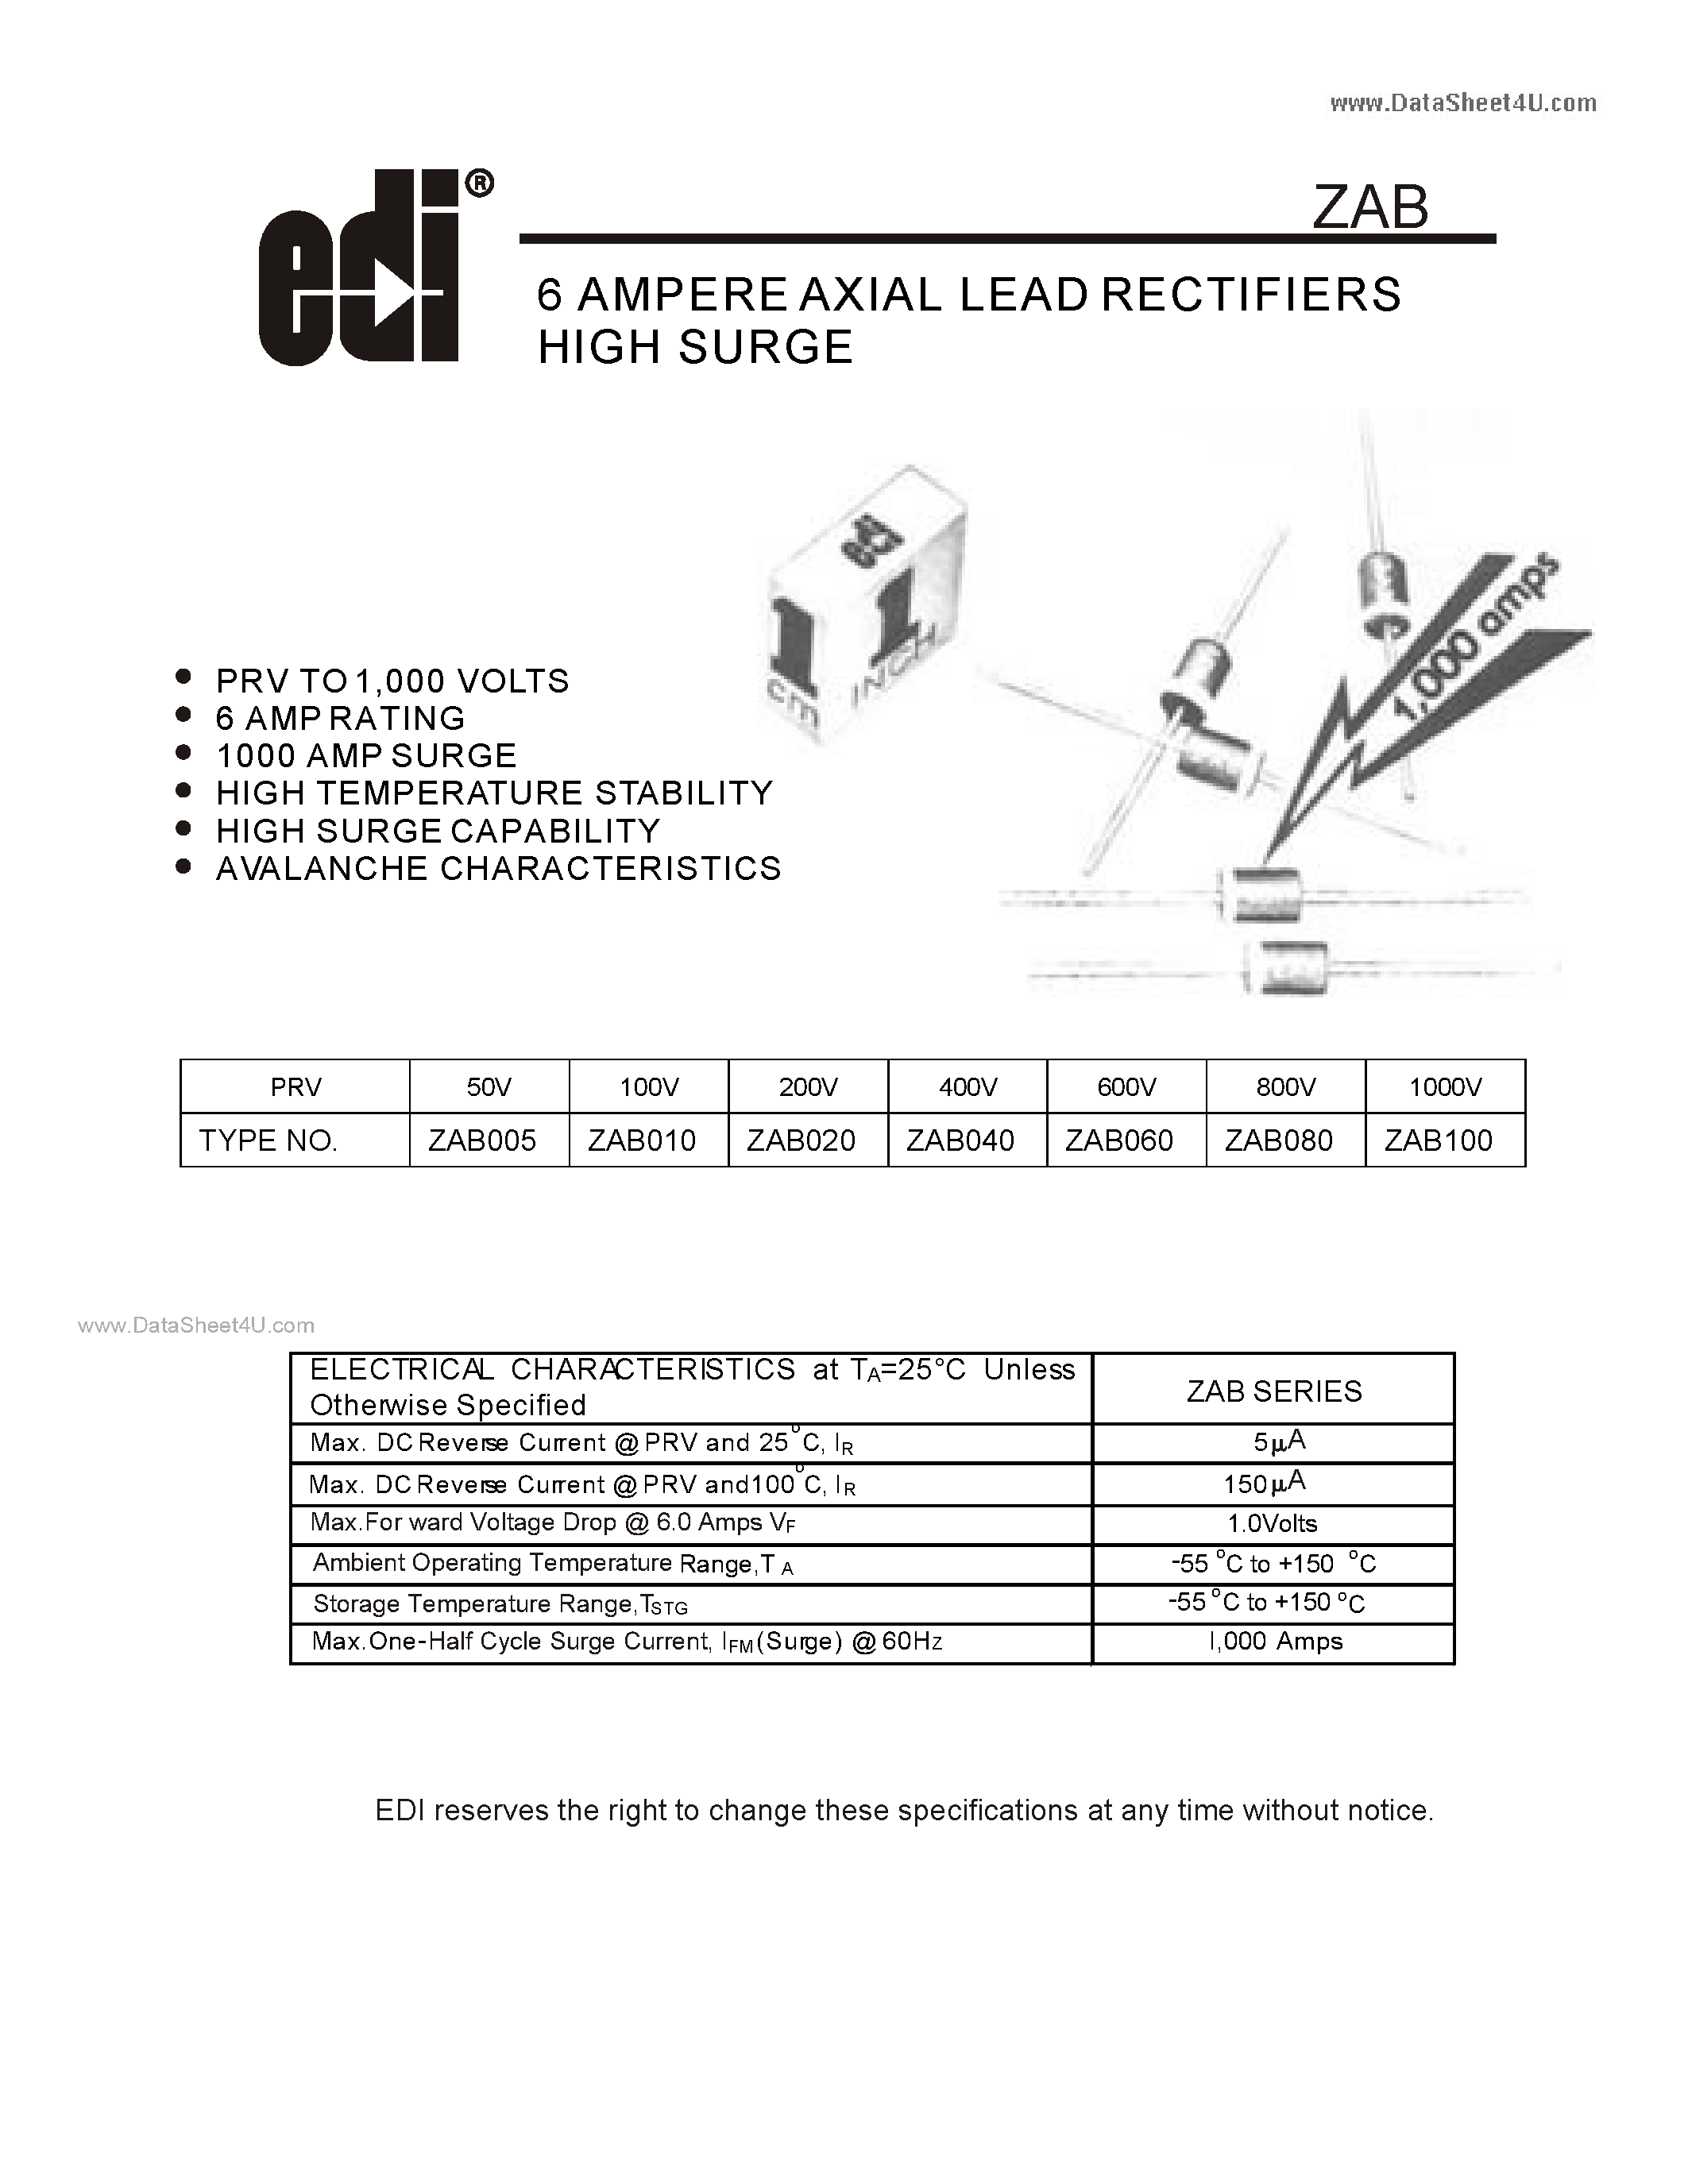 Datasheet ZAB - 6 AMPERE AXIAL LEAD RECTIFIERS HIGH SURGE page 1